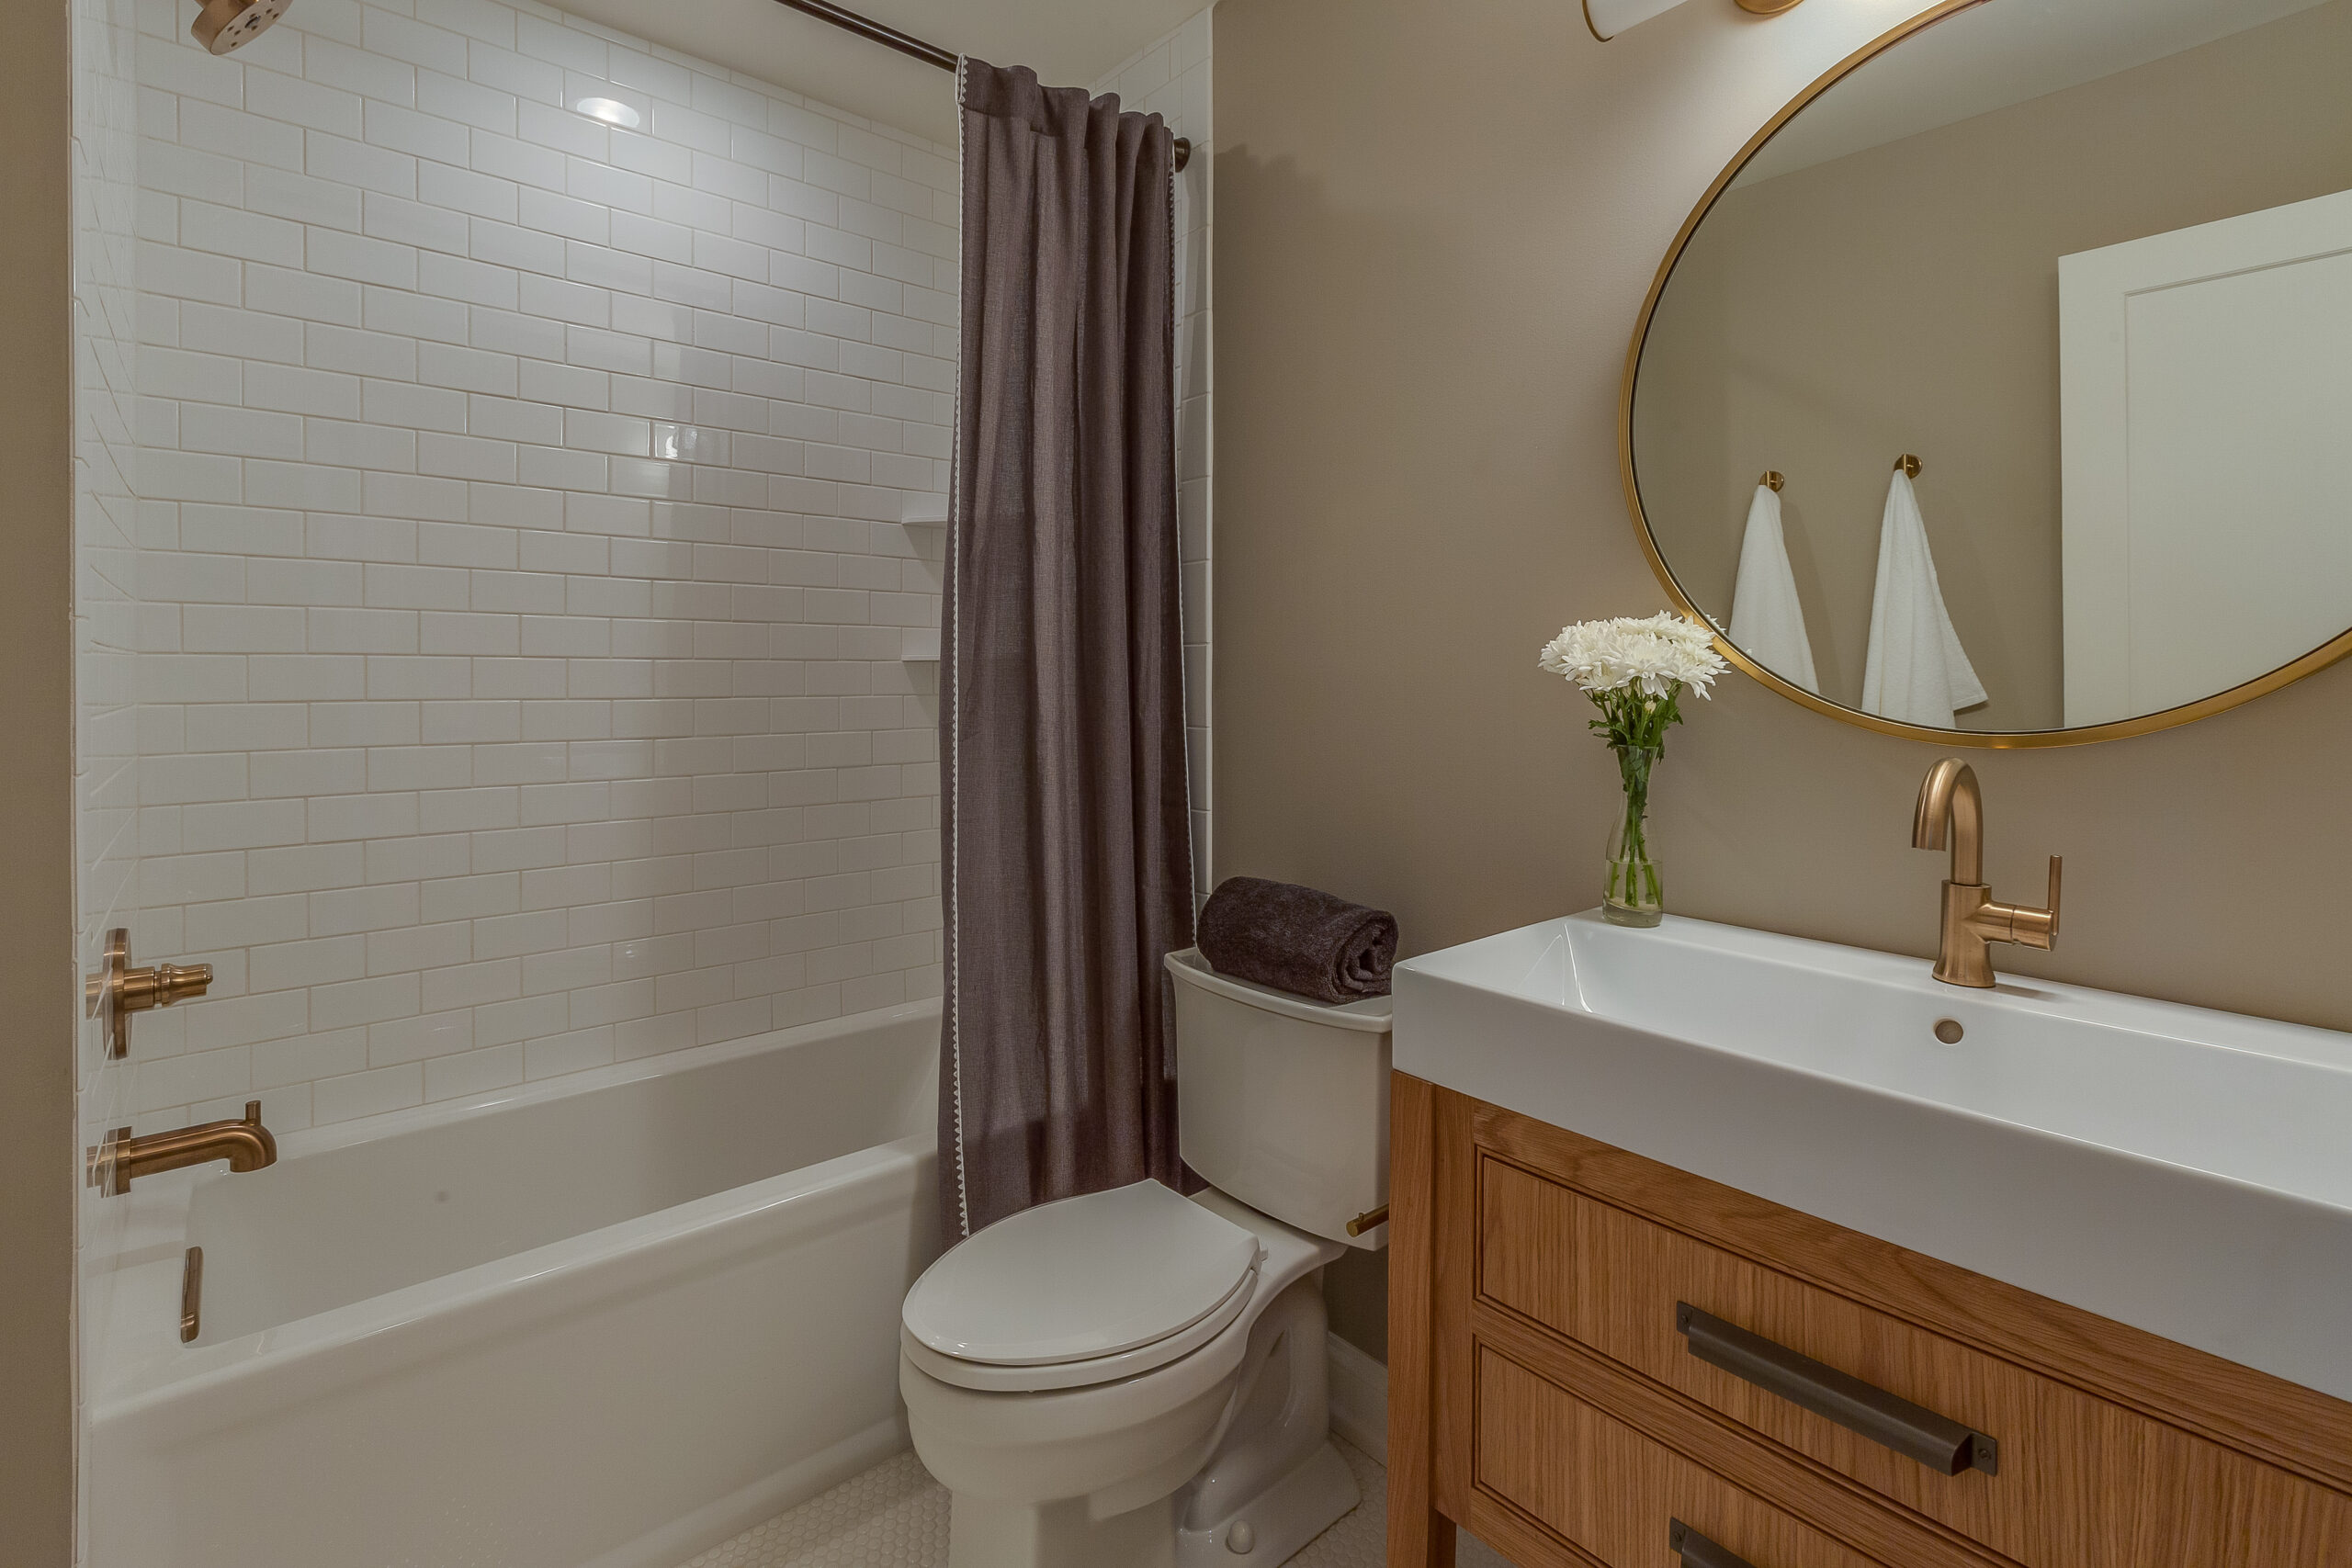 11 Best Rental Apartment Bathroom Upgrades That Are Easy & Inexpensive!